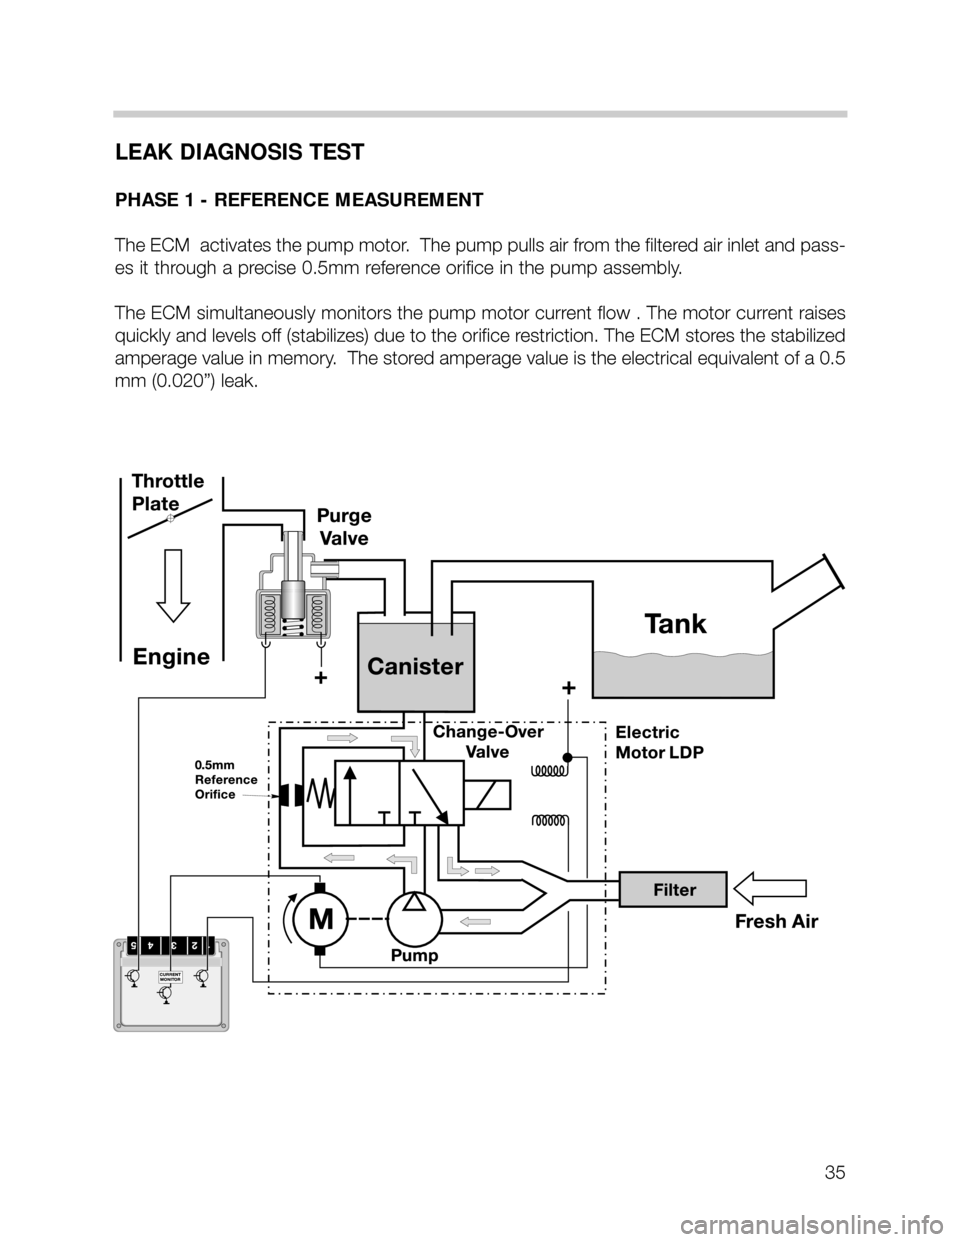 BMW 740i 2001 E38 M62TU Engine Owners Guide LEAK DIAGNOSIS TEST
PHASE 1 - REFERENCE MEASUREMENT
The ECM  activates the pump motor.  The pump pulls air from the filtered air inlet and pass-
es it through a precise 0.5mm reference orifice in the 